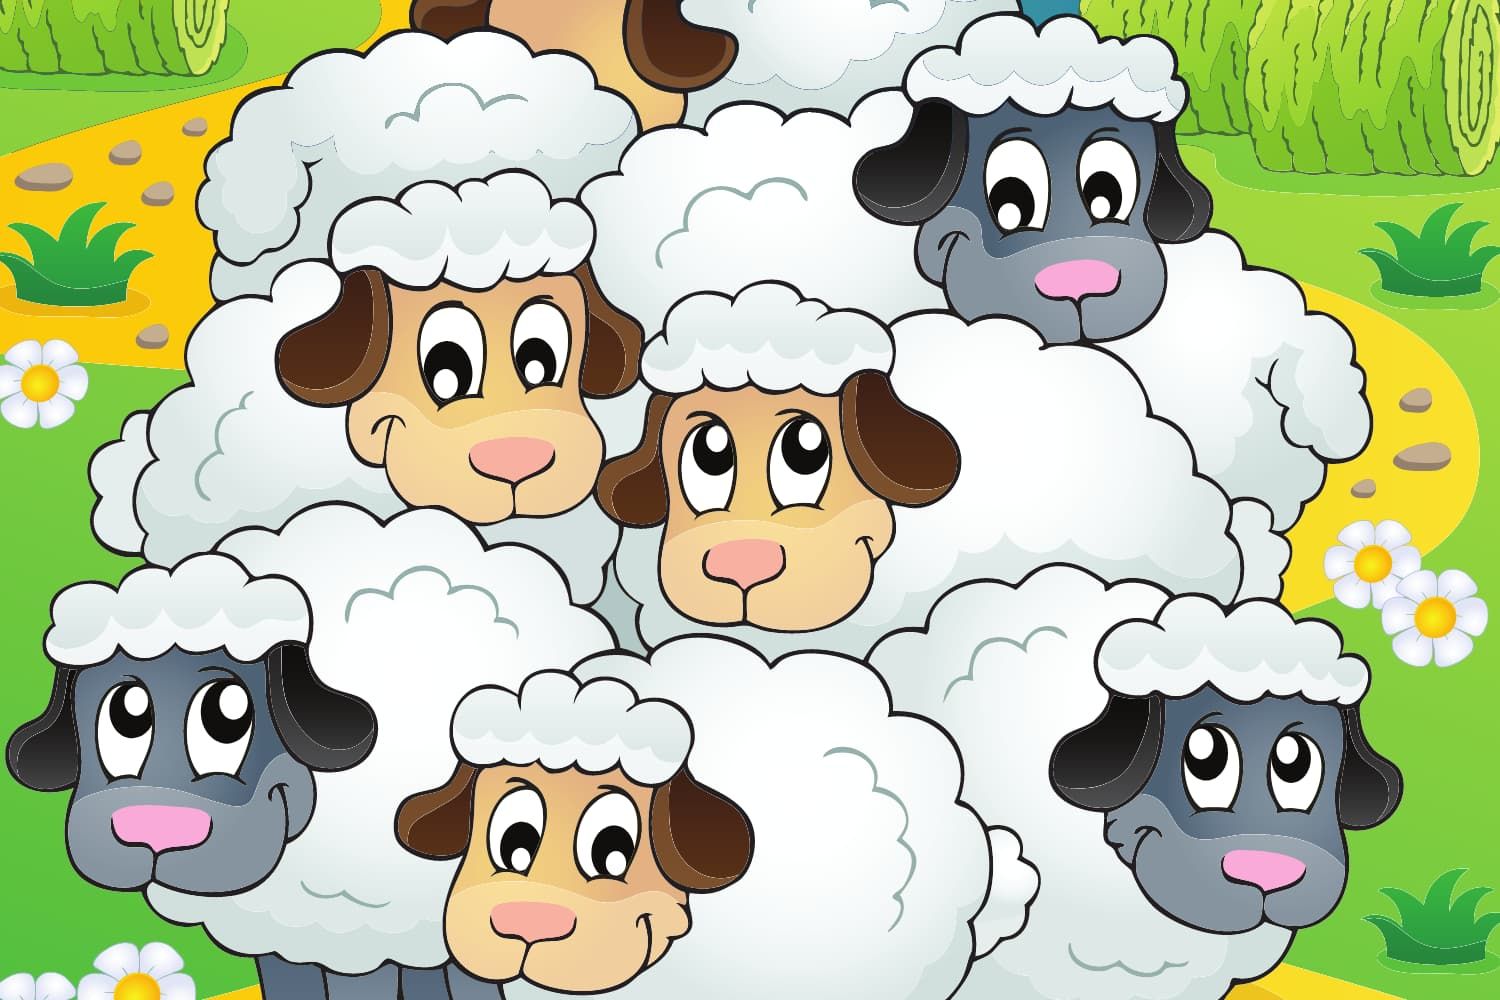 Game%20-%20NT%20Parable%20of%20the%20lost%20sheep%20-%20Count%20the%20sheep-b72376df Belonging / excluding